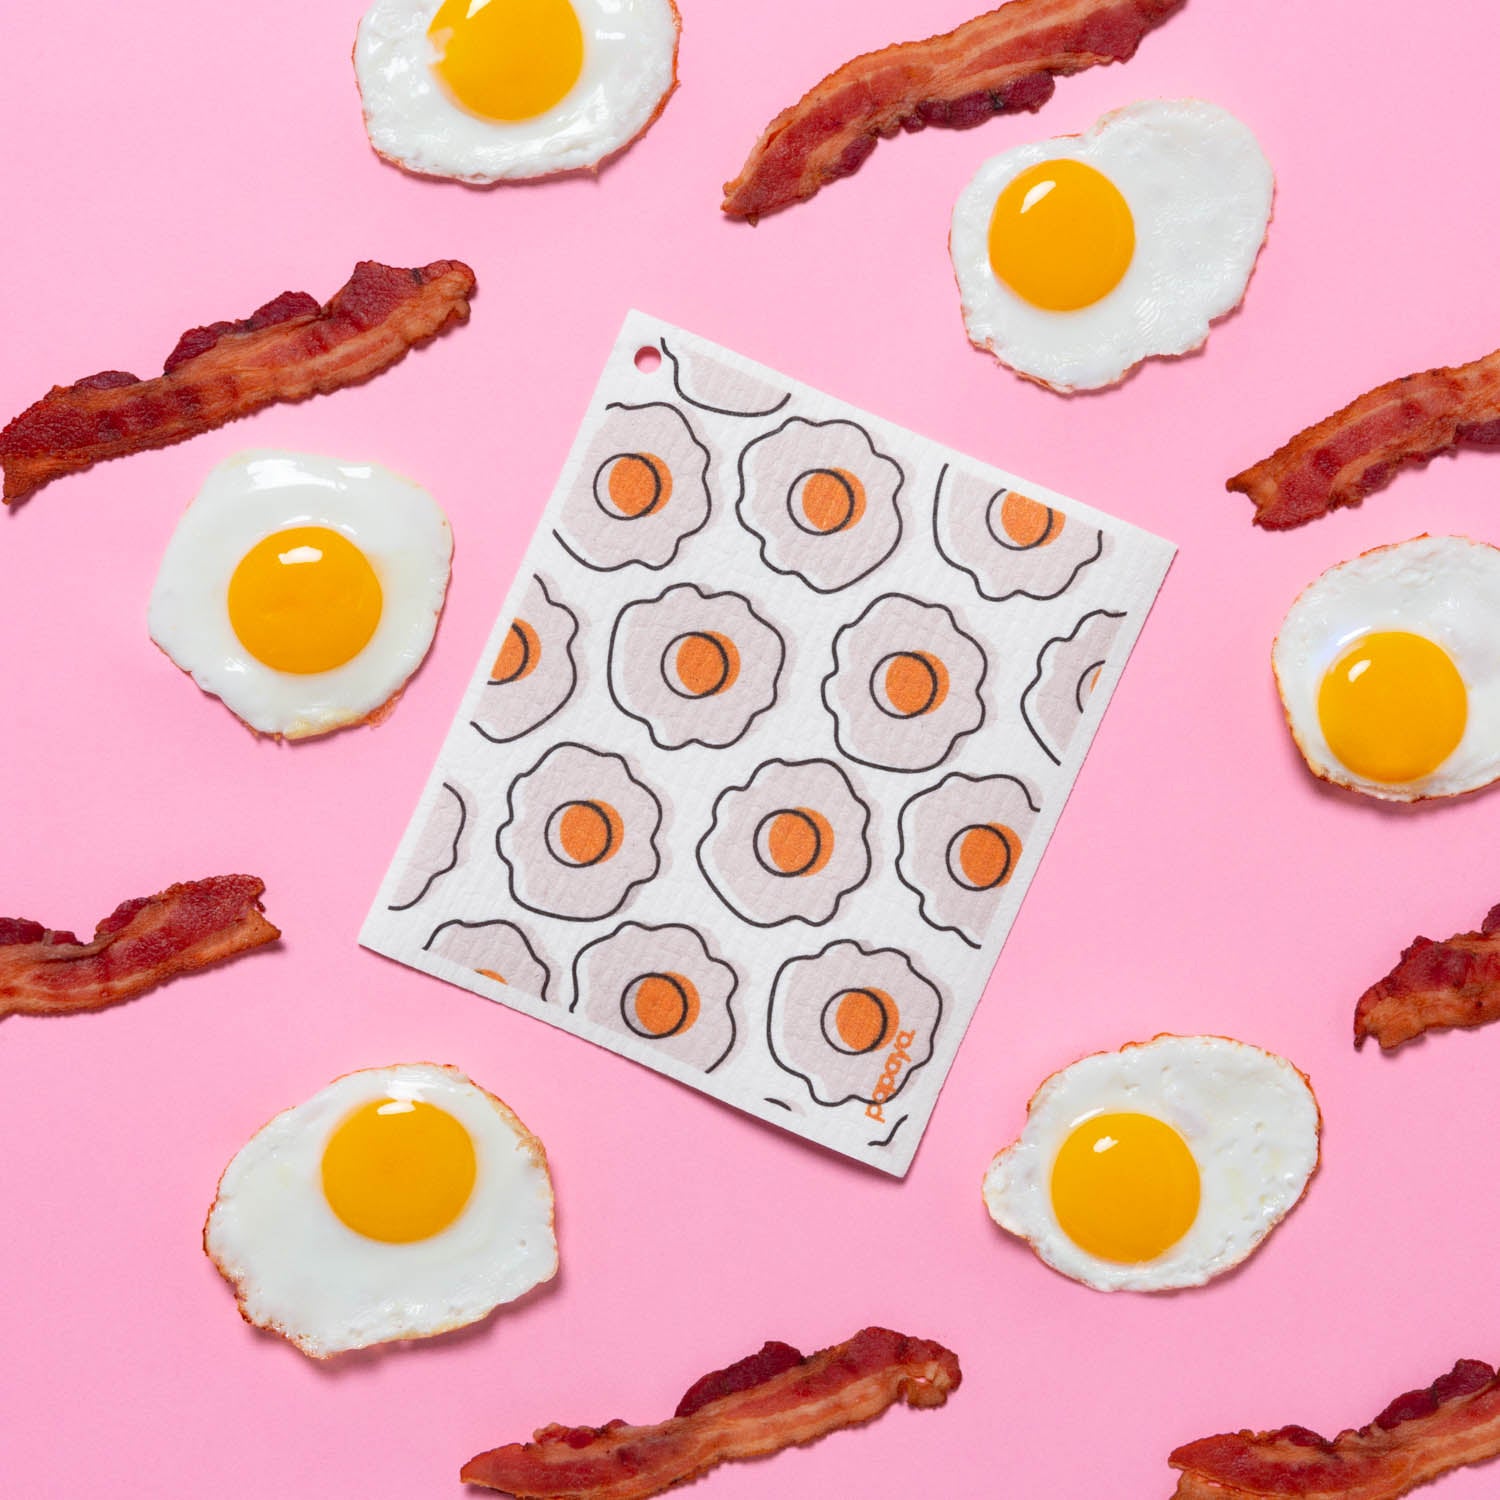 Reusable paper towel with egg design on pink background surrounded by a pattern of sunny side up eggs and bacon